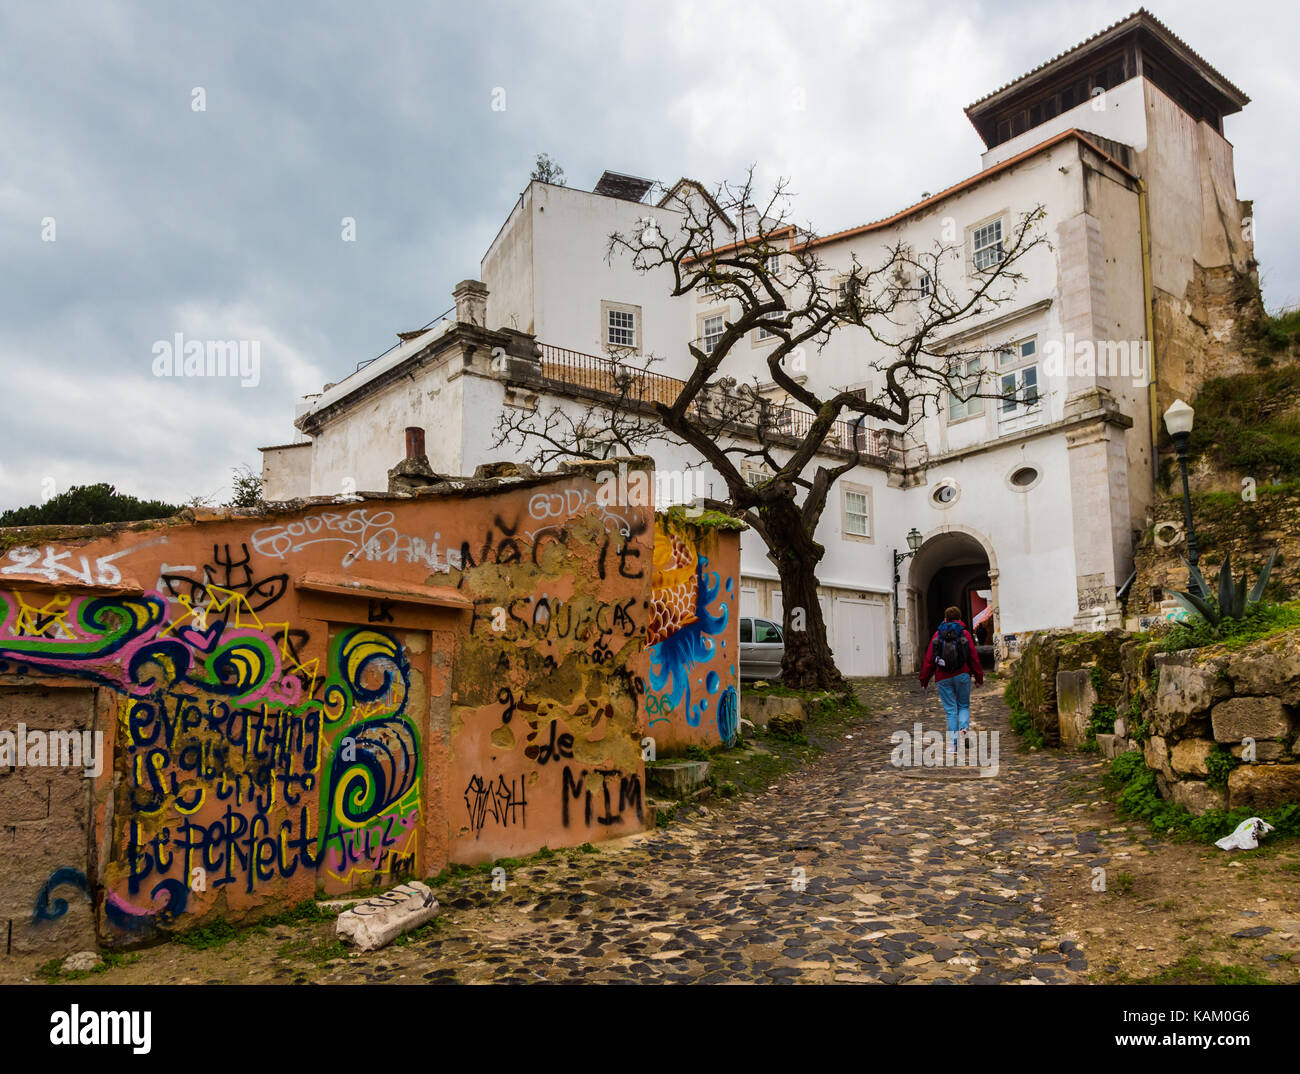 Graffiti in the back streets of Lisbon, Portugal Stock Photo